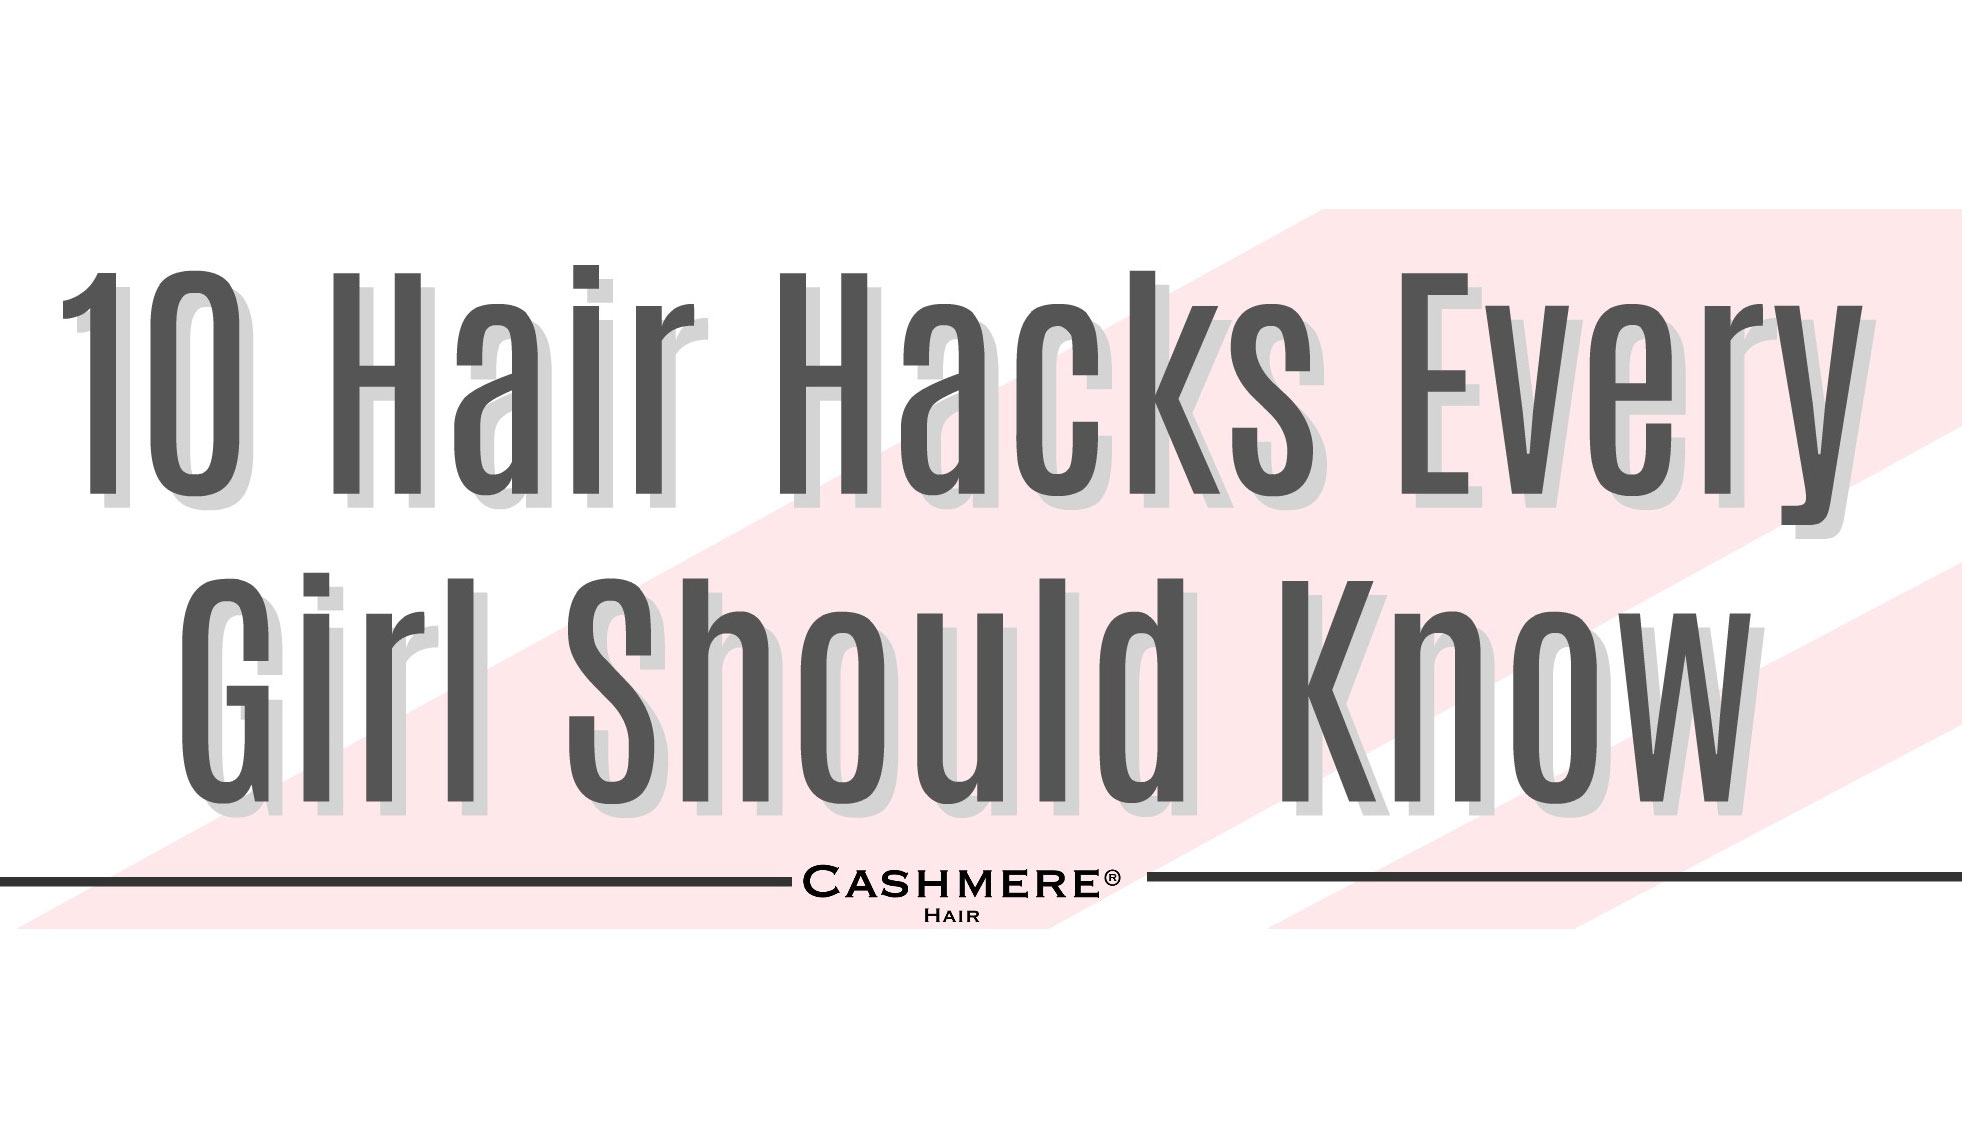 10 Hair Hacks Every Girl Should Know